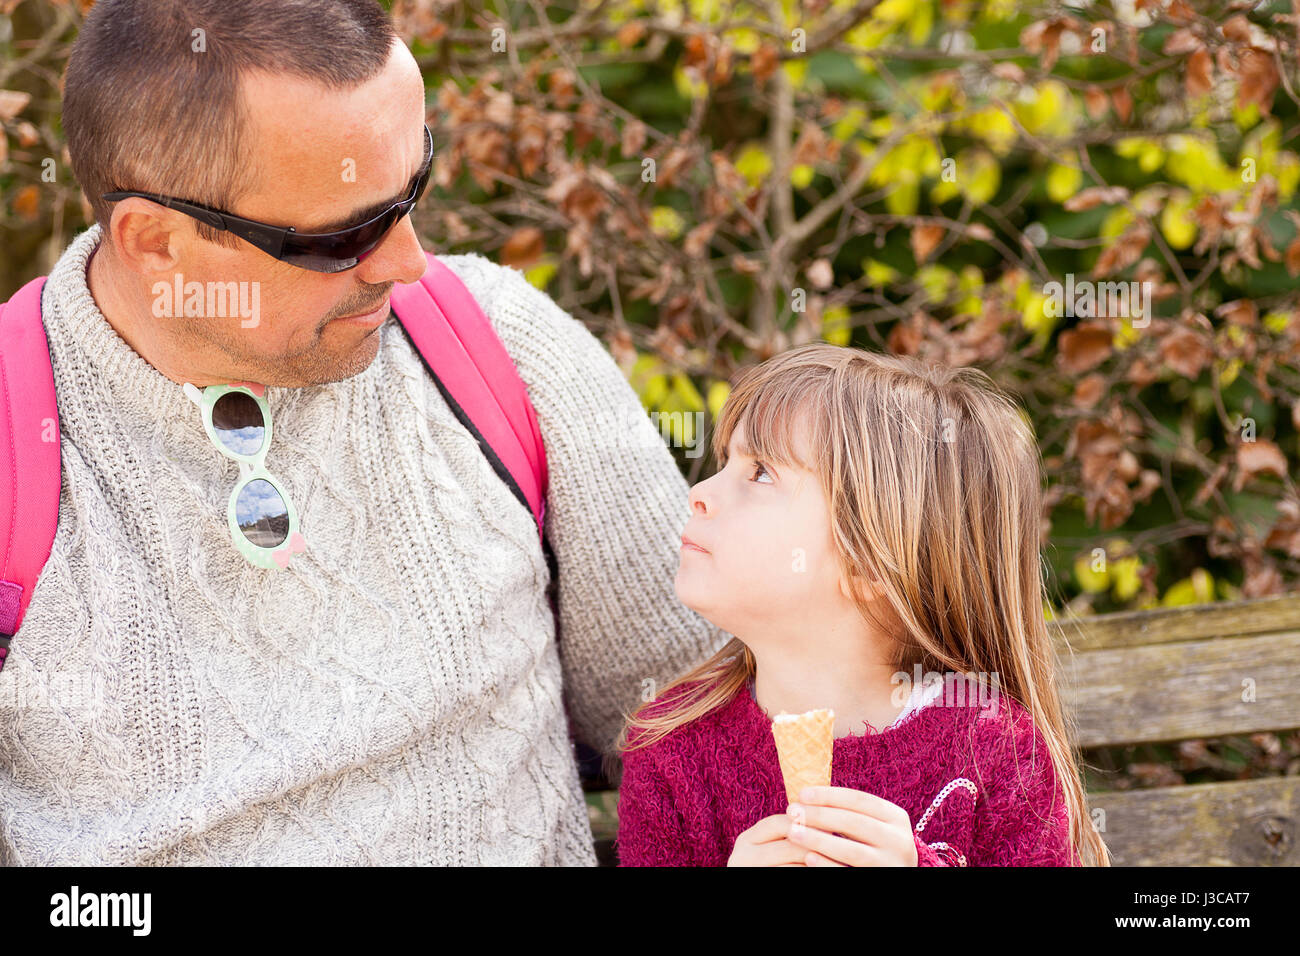 Real people. Man and little girl looking at each other. Father and daughter enjoying quality time outdoors with icecream. Candid family portrait. Stock Photo